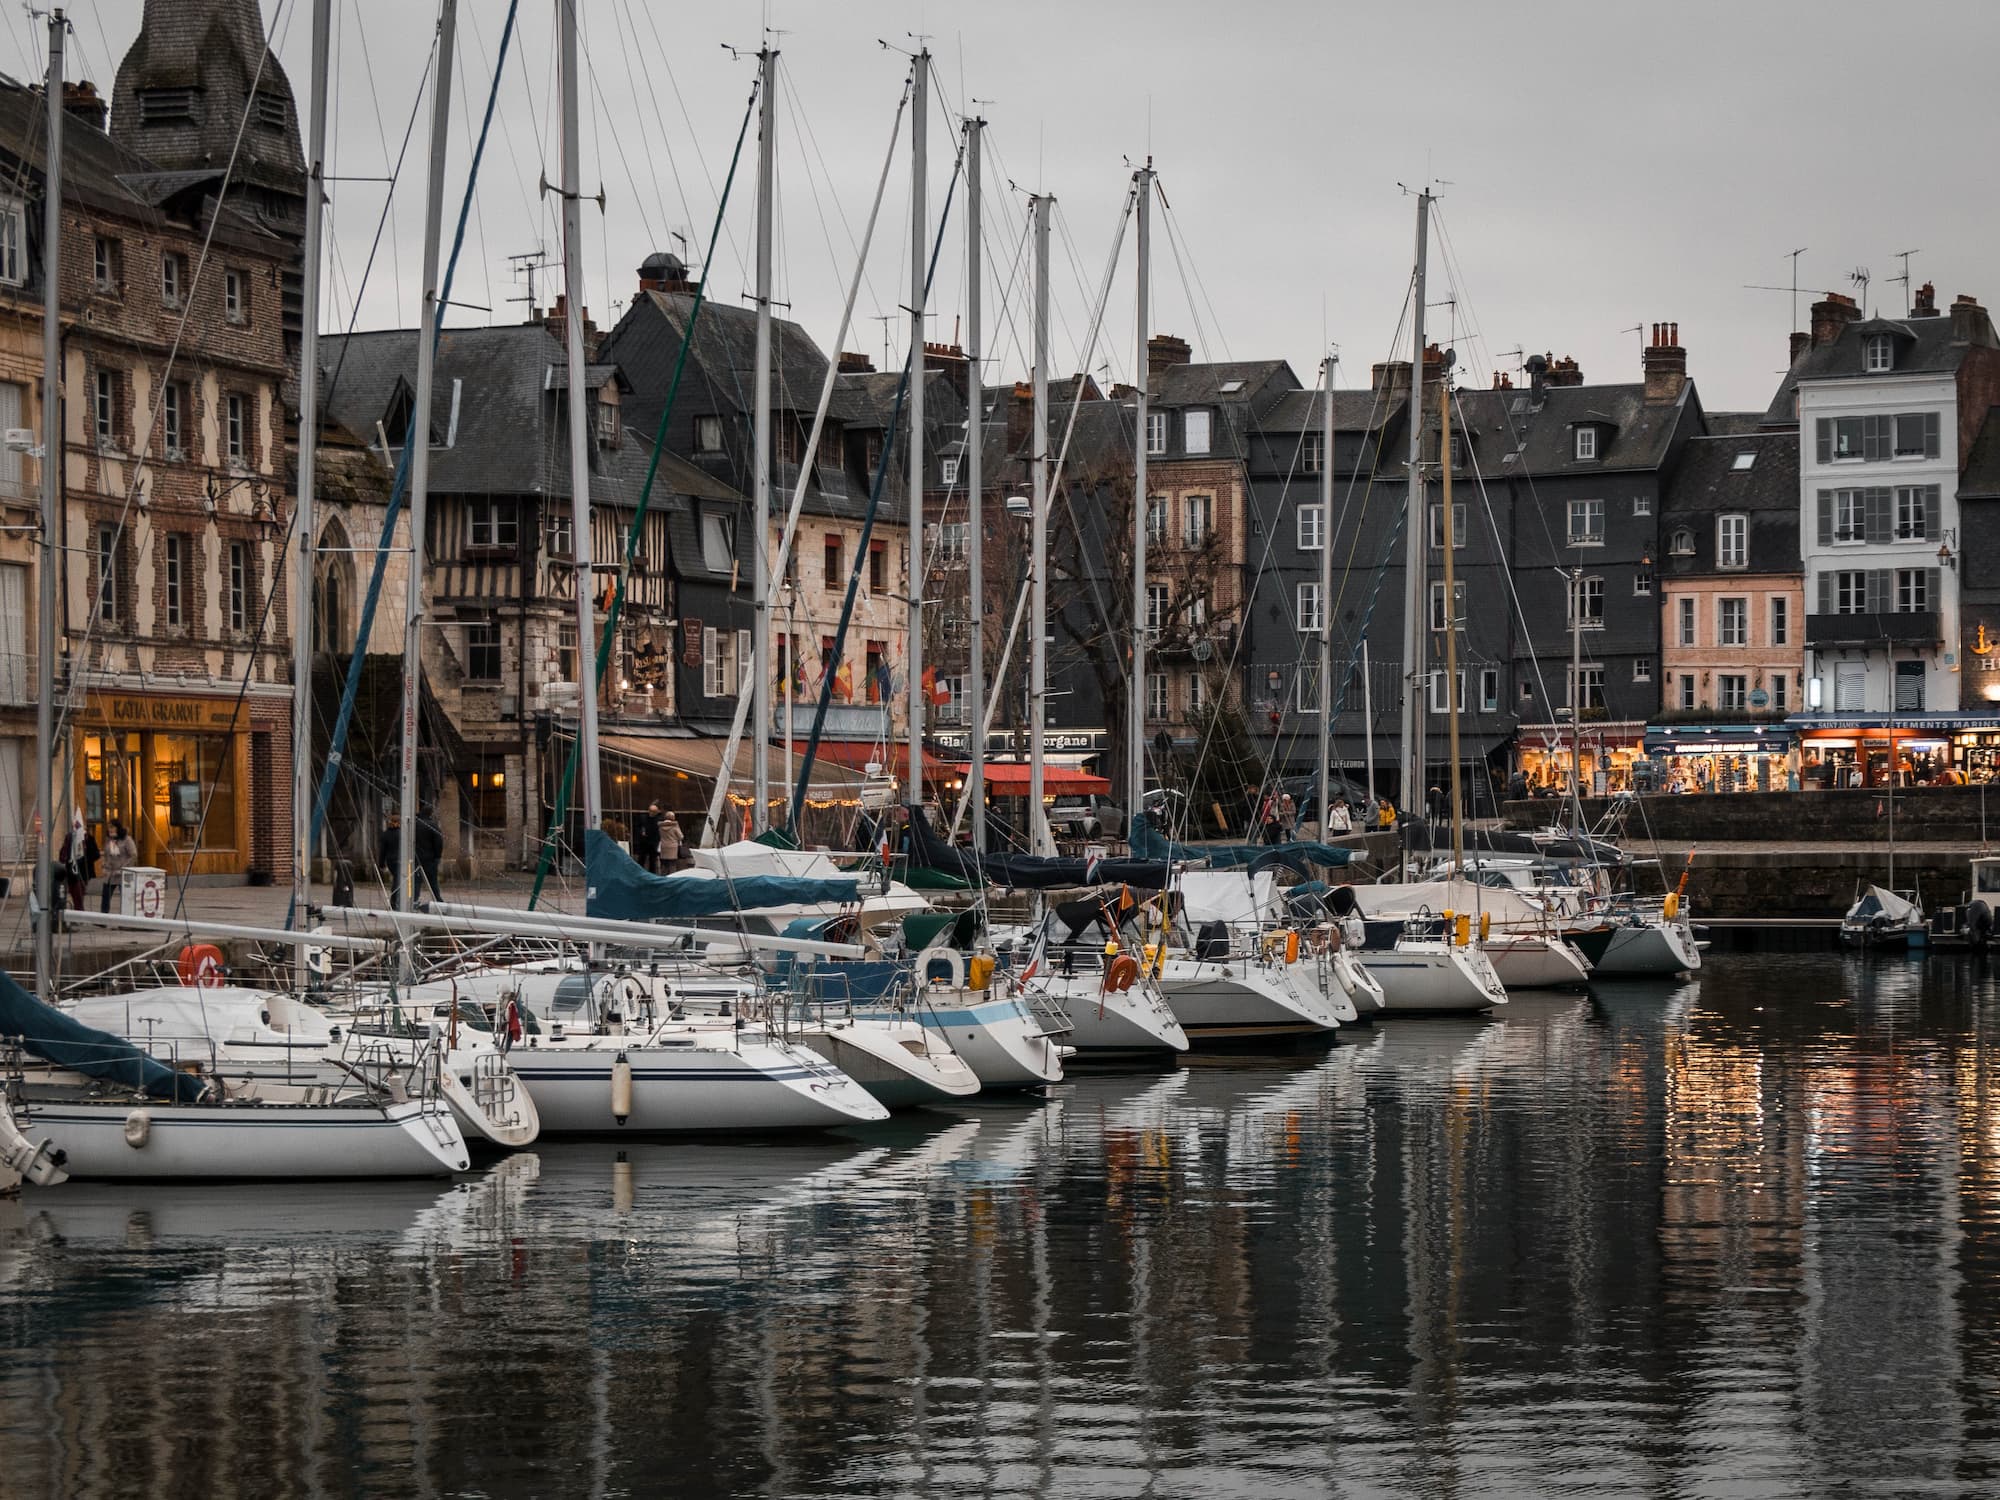 Honfleur inspired many art pieces